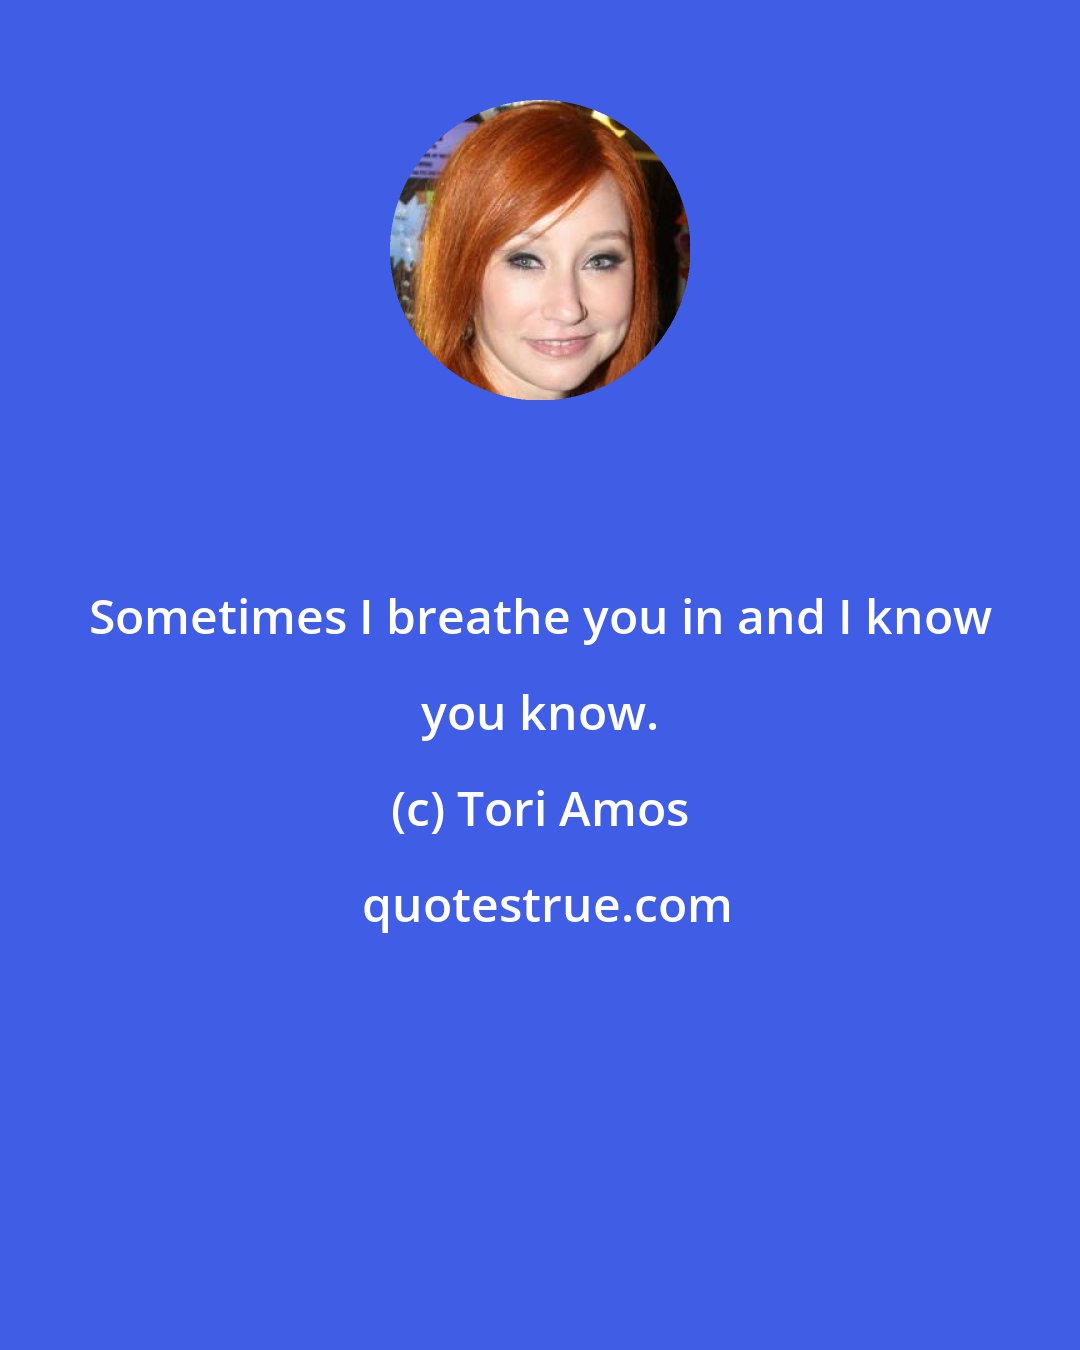 Tori Amos: Sometimes I breathe you in and I know you know.